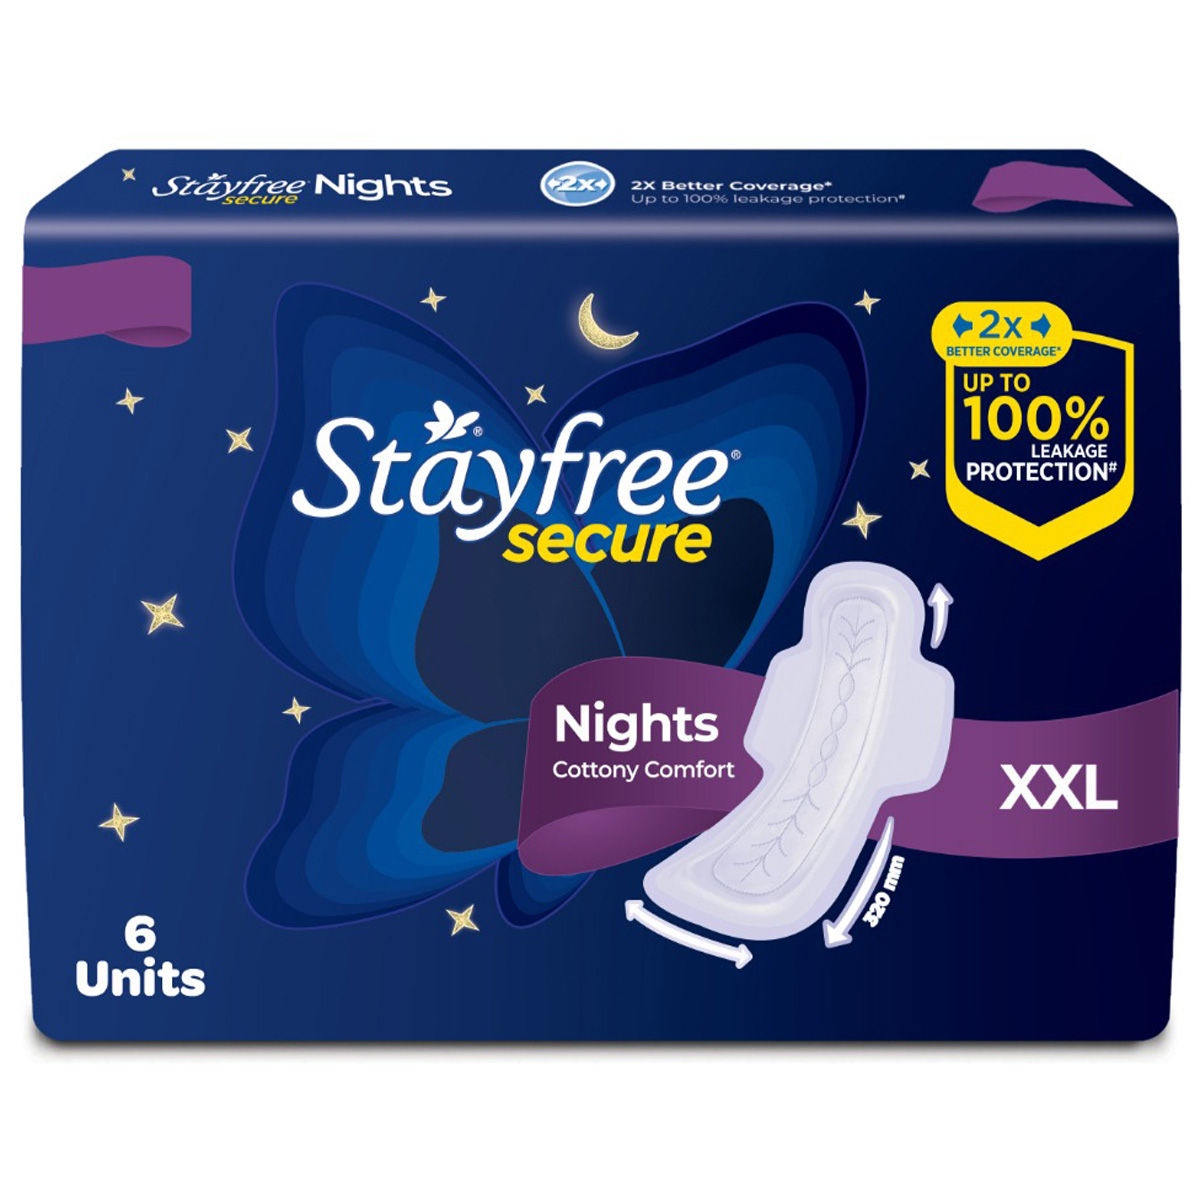 Stayfree Regular Maxi Pads 6 packs of 24 count